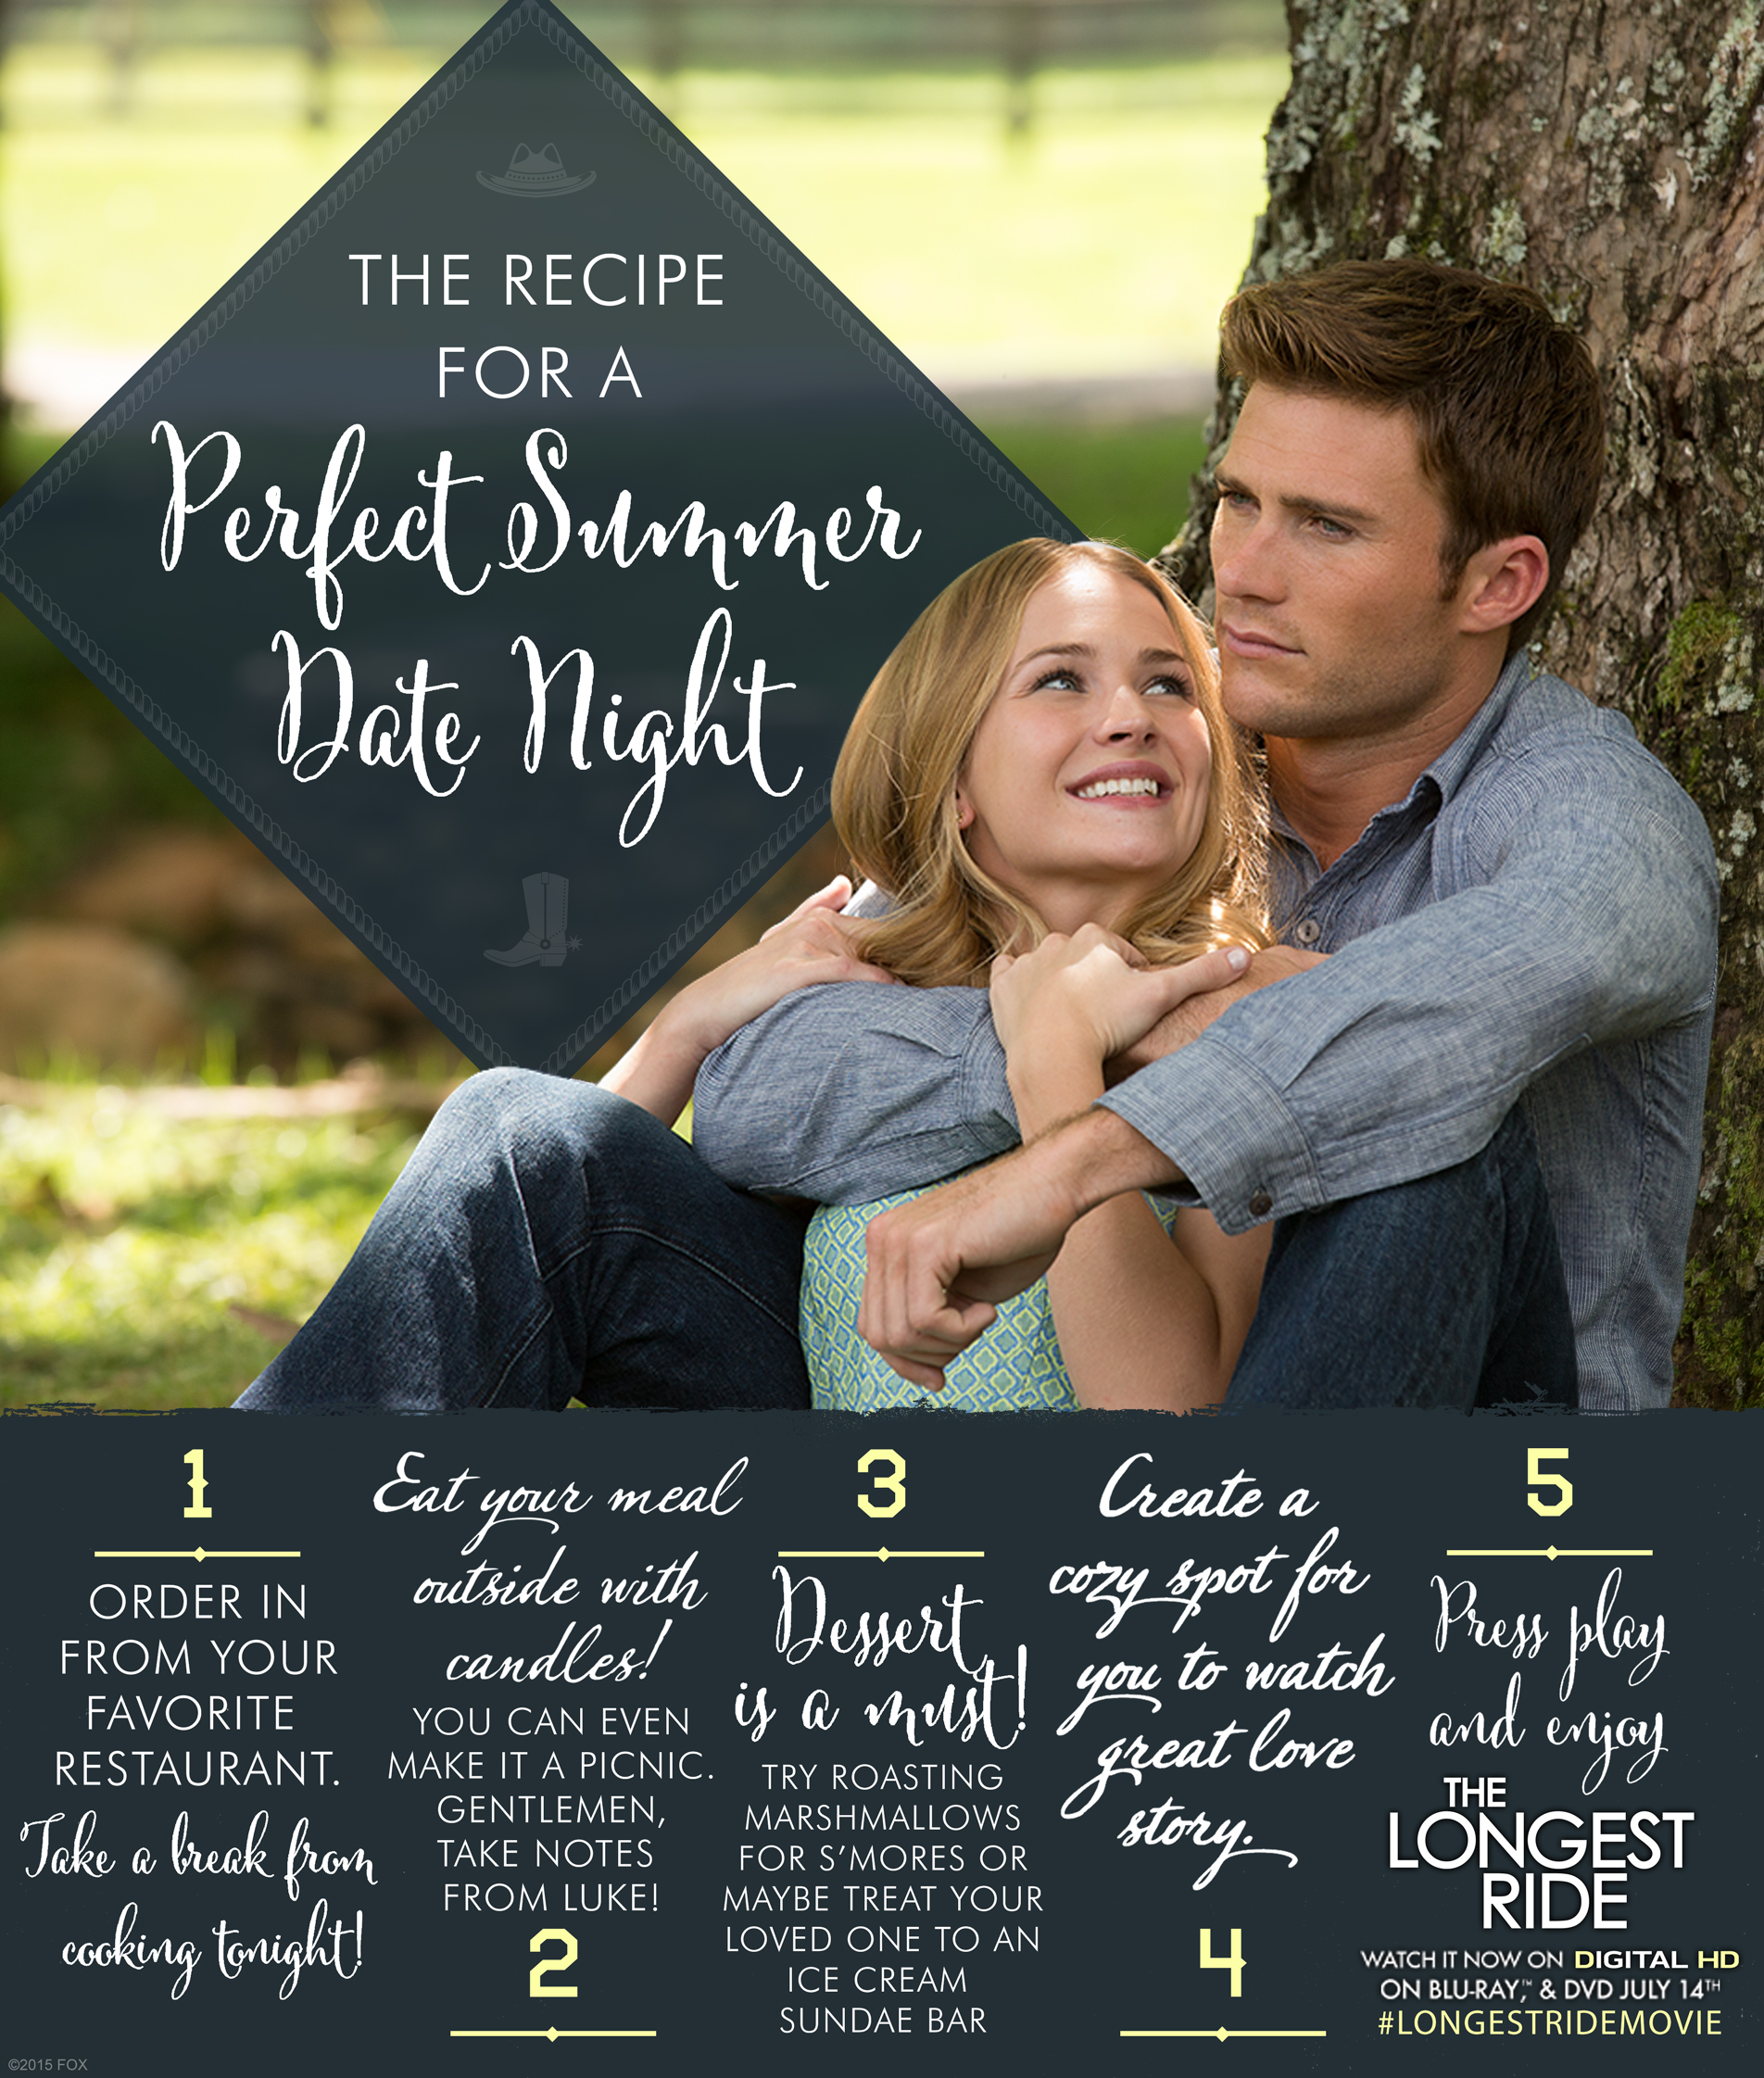 The Longest Ride Blu-ray Giveaway Closed - No Time Mommy